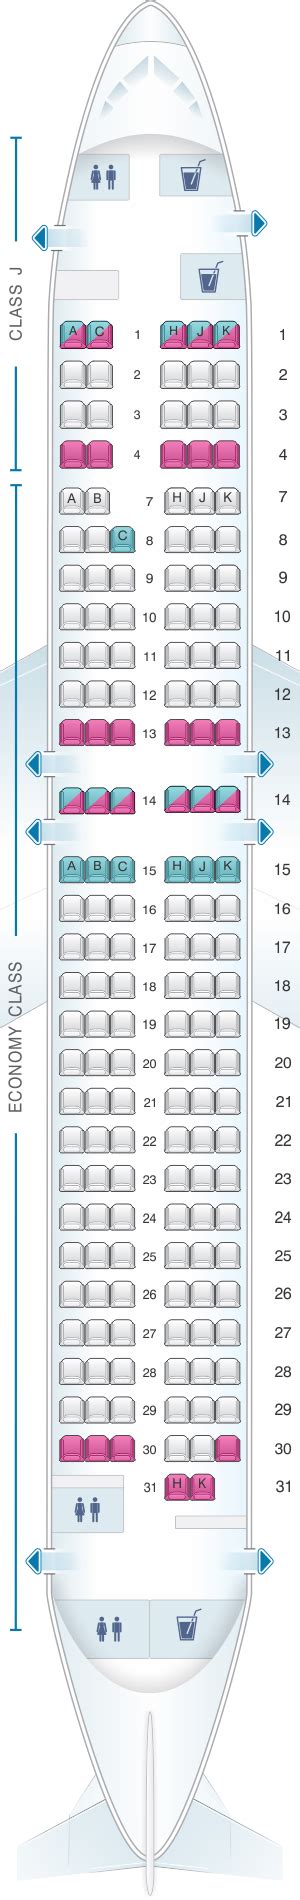 Seat Map United Airlines Boeing B757 200 752 Version 1 Ce1